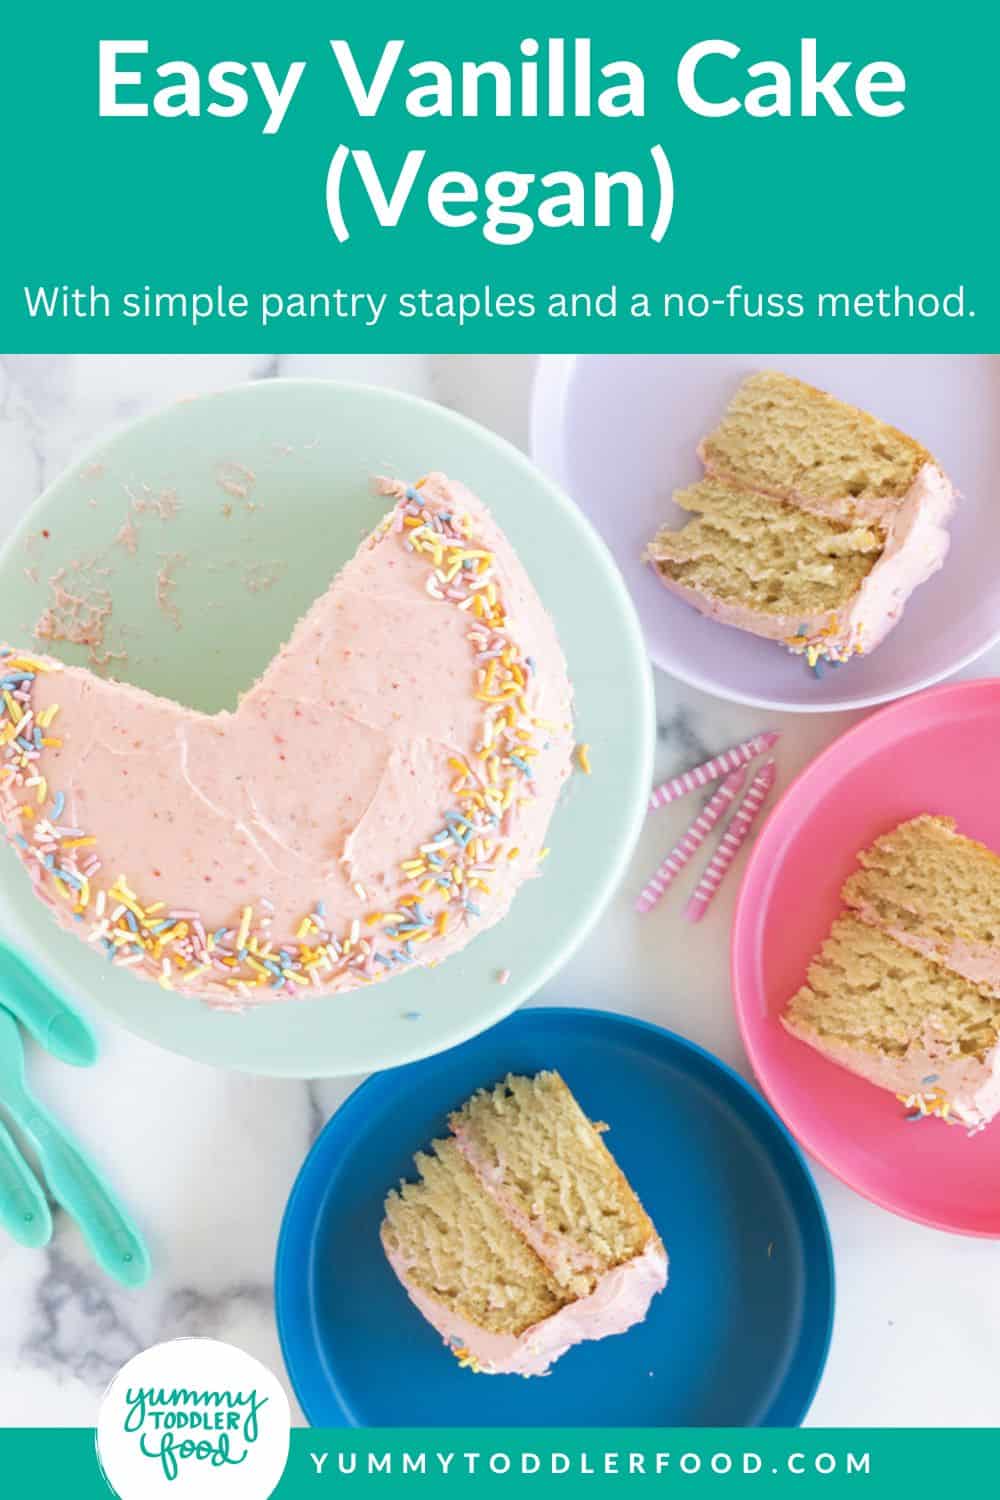 how to make easy vanilla cake in grid of 4 images.